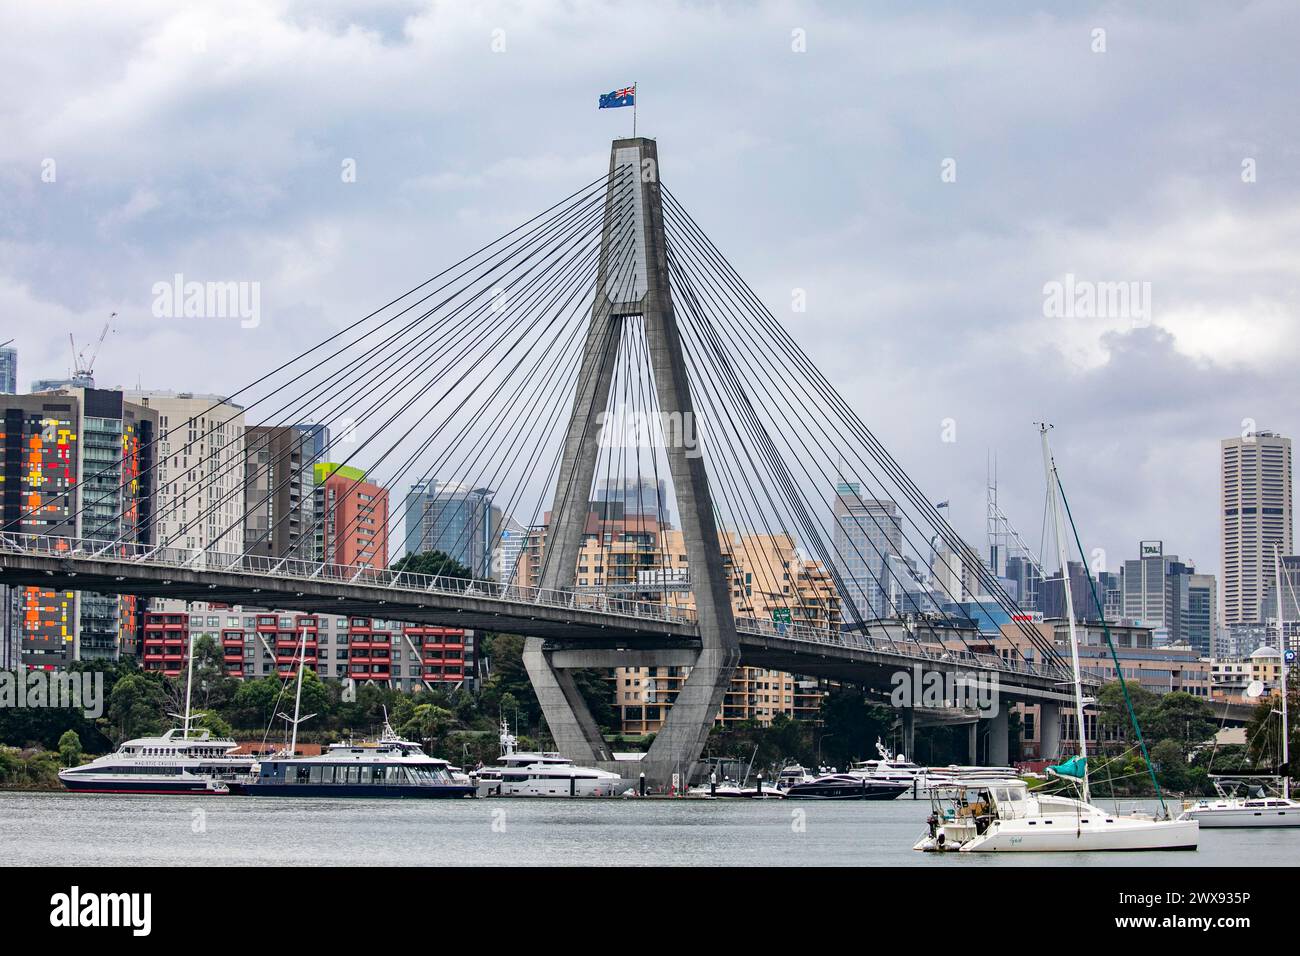 Anzac Bridge in Sydney connecting Pyrmont ( pictured) to Glebe, boats in the bay and Sydney city centre with high rise apartment buildings, Australia Stock Photo